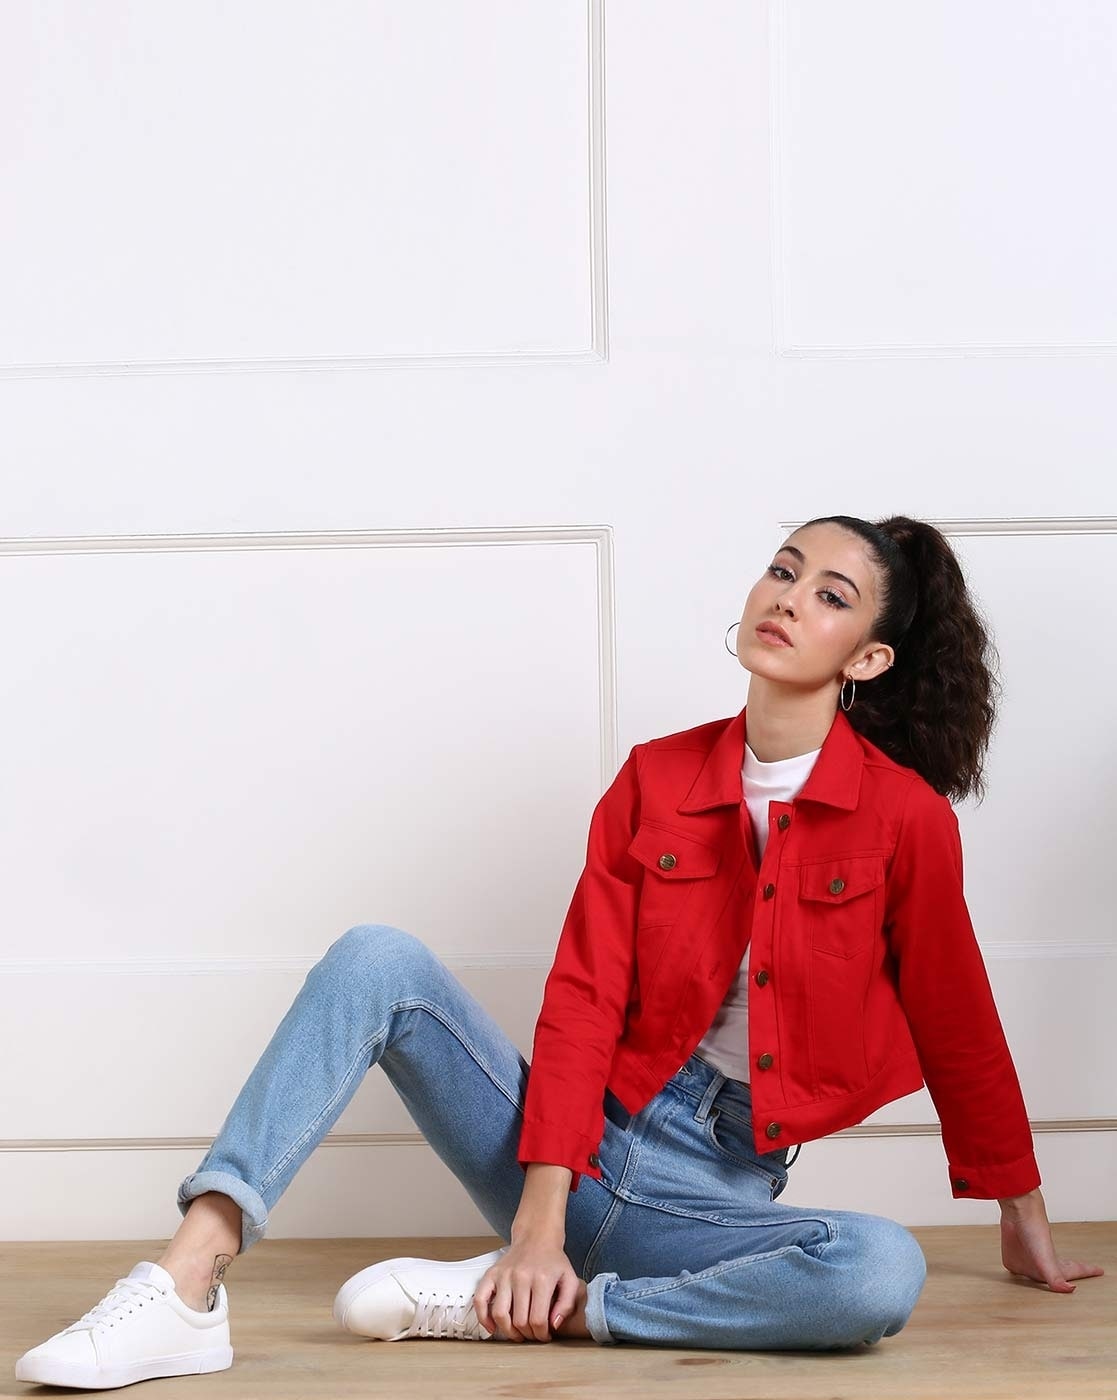 Corduroy is having a moment right now. Tap into the rend with our boxy  jacket in red. | Red jacket outfit, Jacket outfit women, Red denim jacket